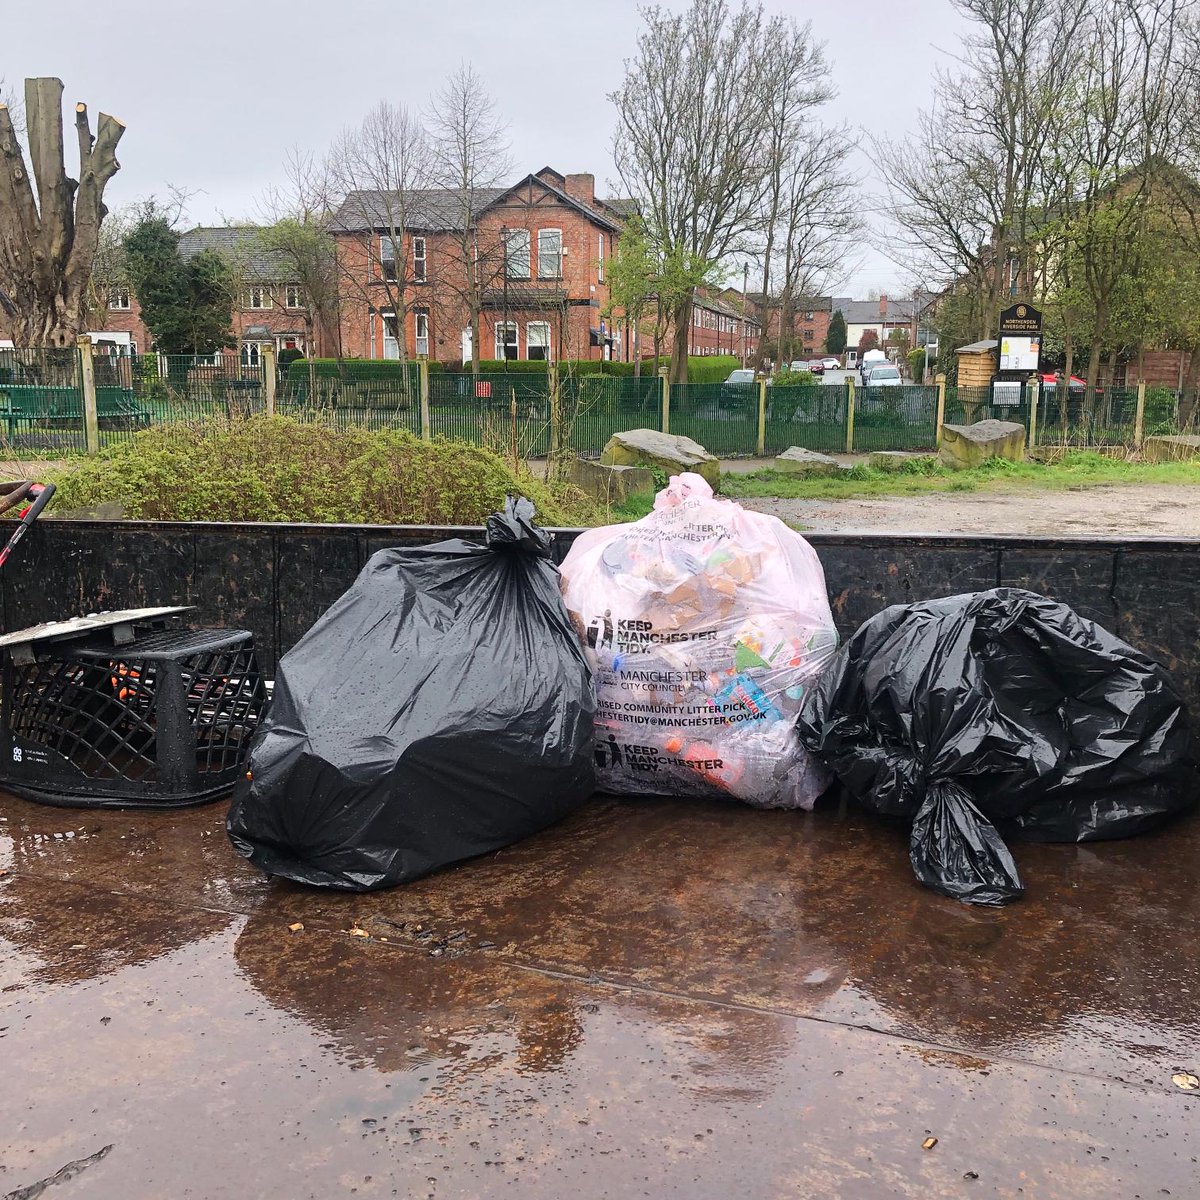 Great team work today! Thanks to Richard @MCCWythenshawe and David, tidy up and litterpick at Riverside Park picnic area and play area. #greatbritishcleanup24 #keepmanchestertidy #lovewhereyoulive #community @riversidepark22 @WarriorsWaste